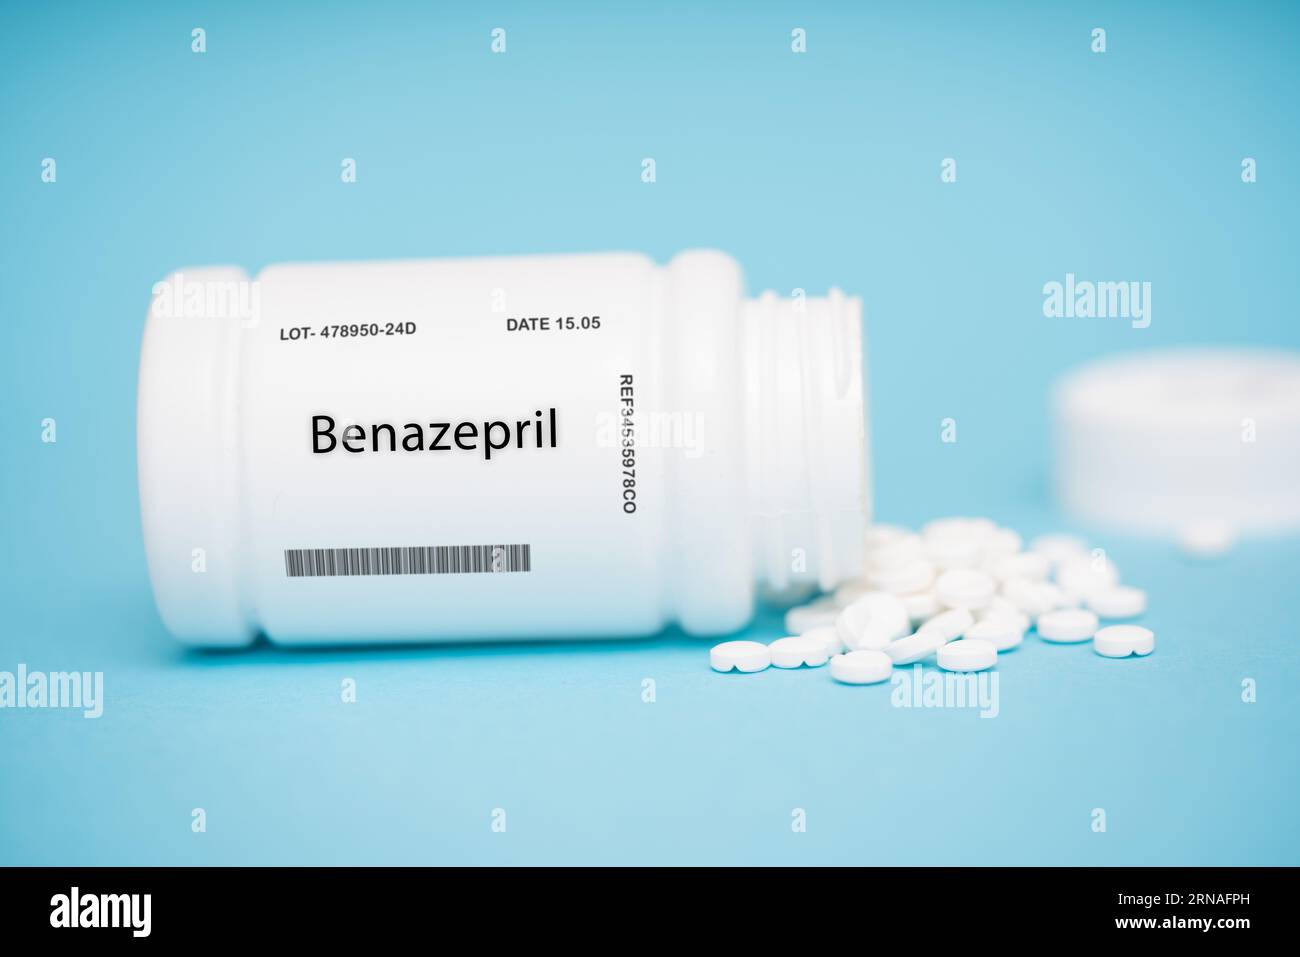 Benazepril is an ACE inhibitor used to treat high blood pressure and heart failure